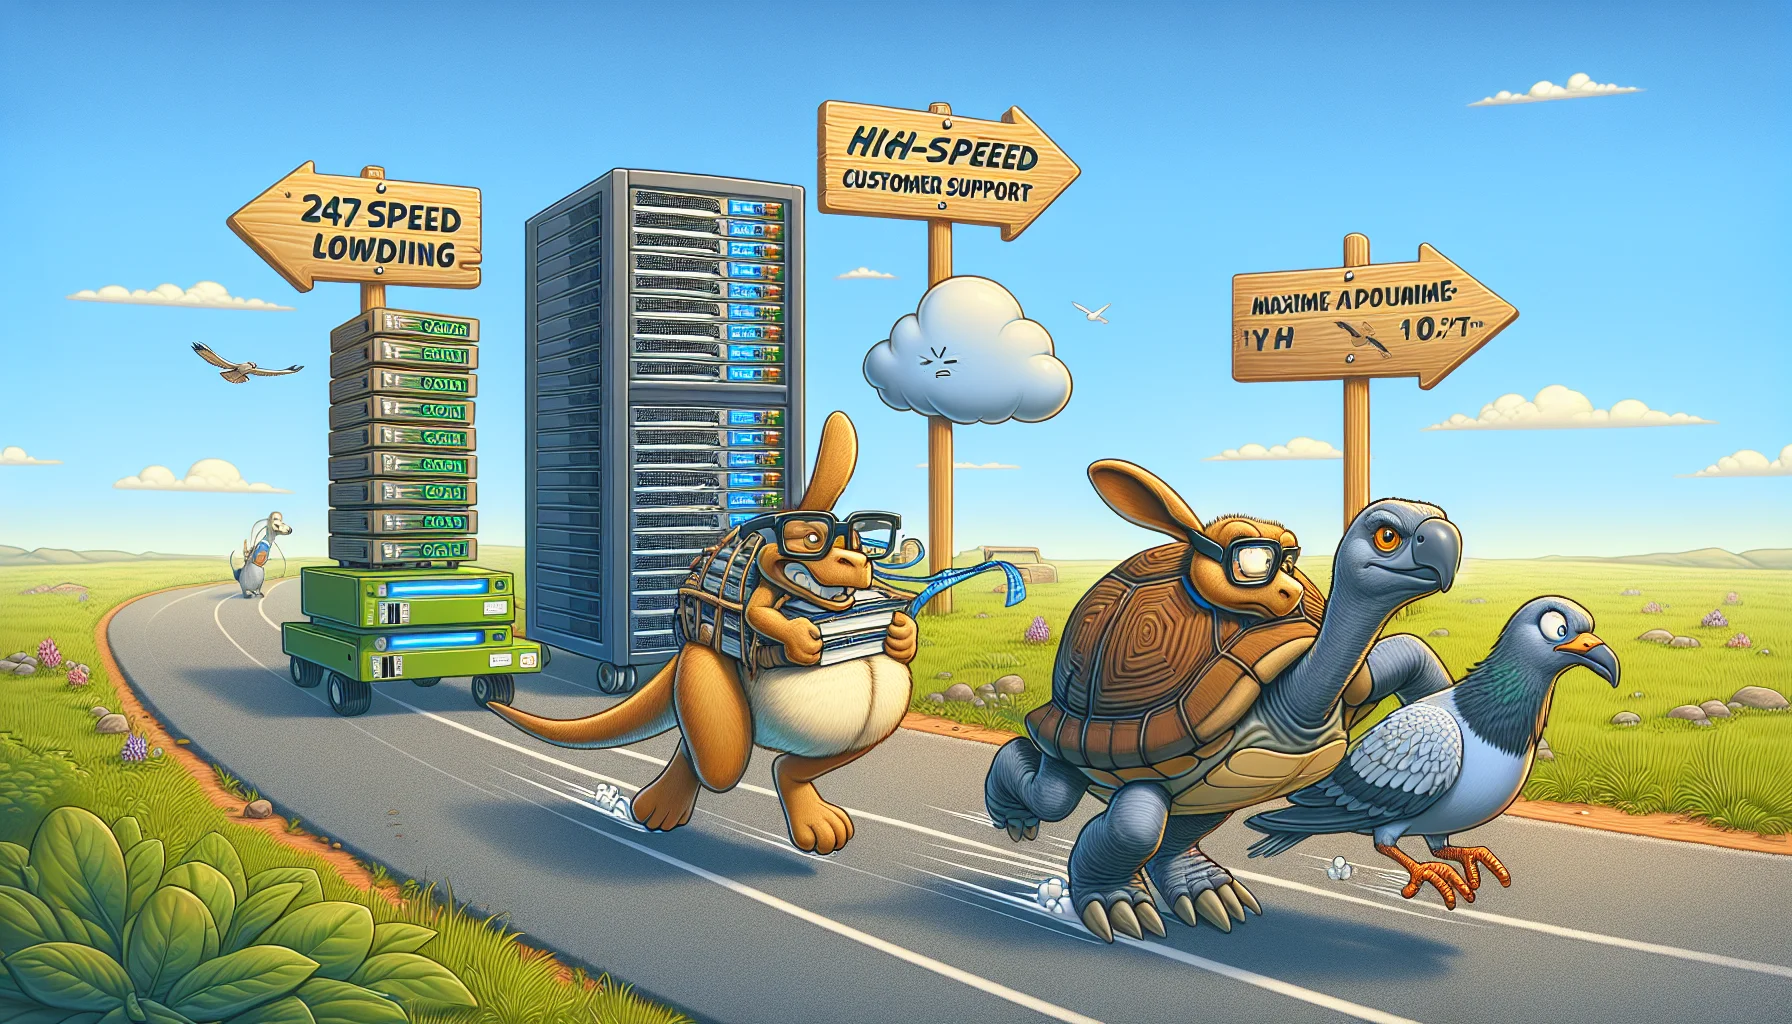 Create a highly-detailed, comical and attractive image representing alternatives to a popular web hosting service, symbolized as different animals in a race. Depict a snappy turtle with glasses carrying a stack of server racks racing ahead of a sleepy-looking kangaroo with a pouch full of HTML tags and a laid-back pigeon carrying a cloud. They are all on a journey along a road that symbolizes the journey from an idea to a successful website. In the background are signs pointing out features such as '24/7 customer support', 'High-speed loading', and 'Maximum Uptime'.